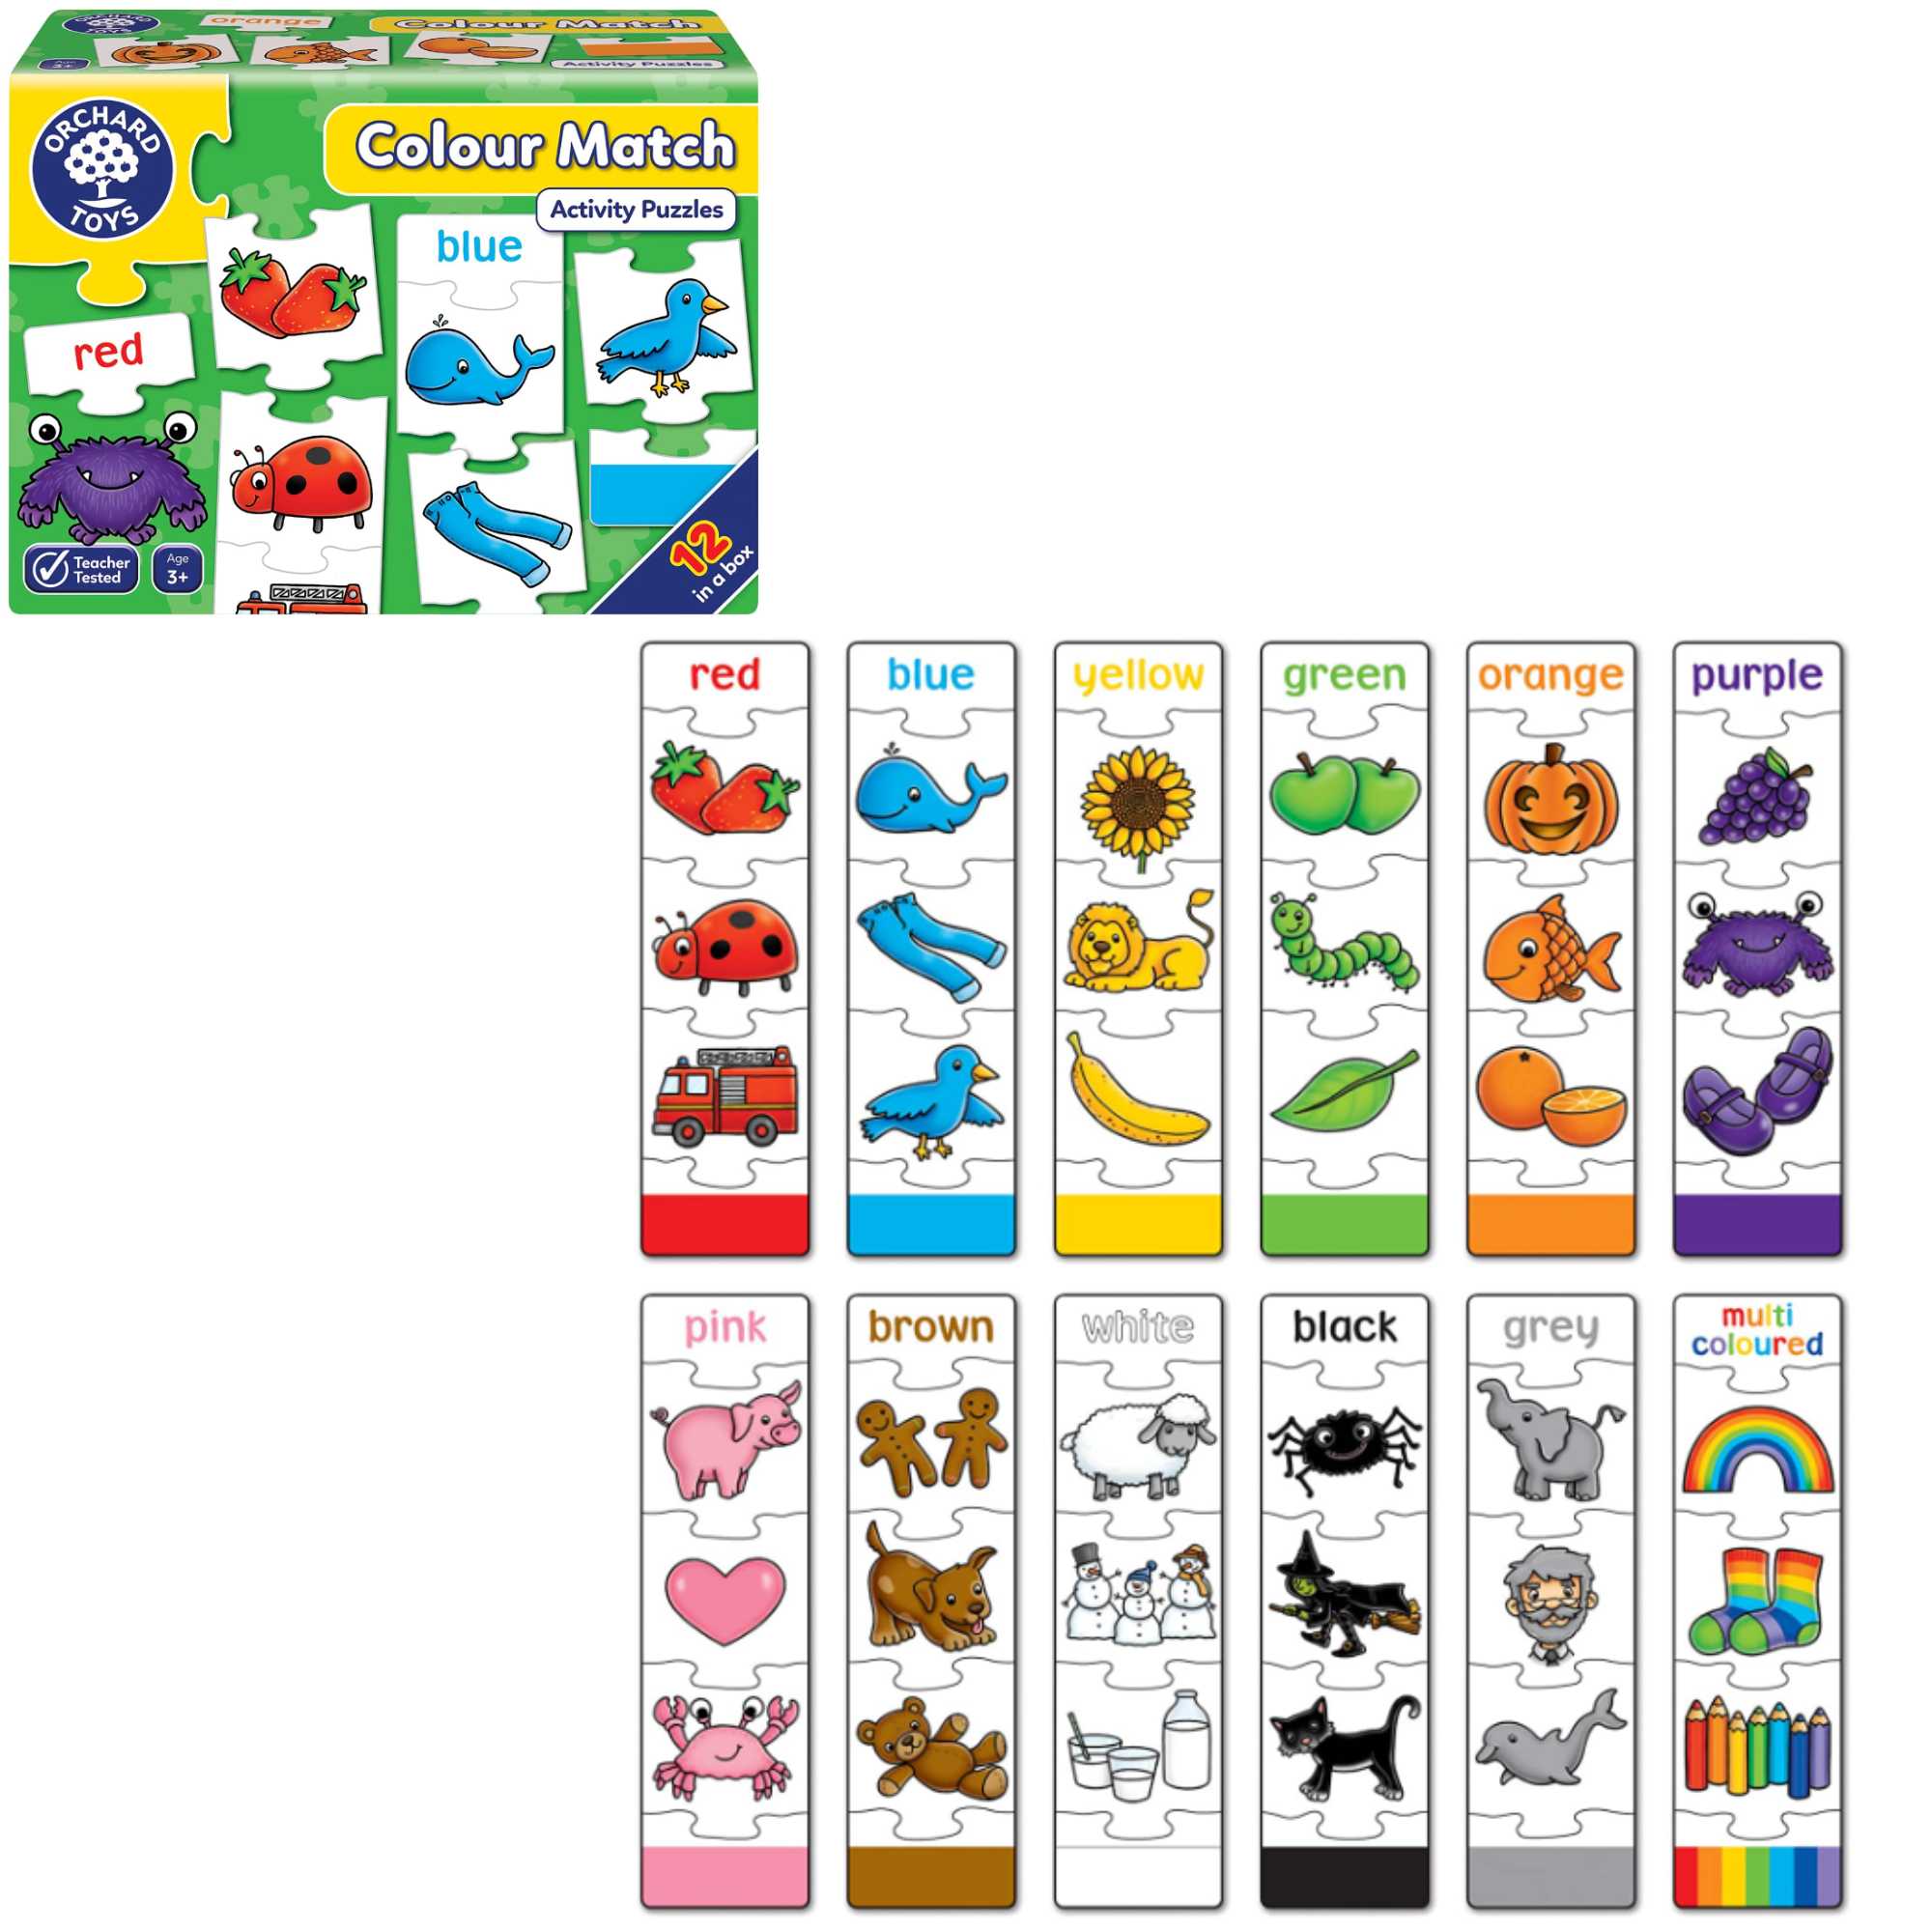 Orchards Colour Match Children's Card Game